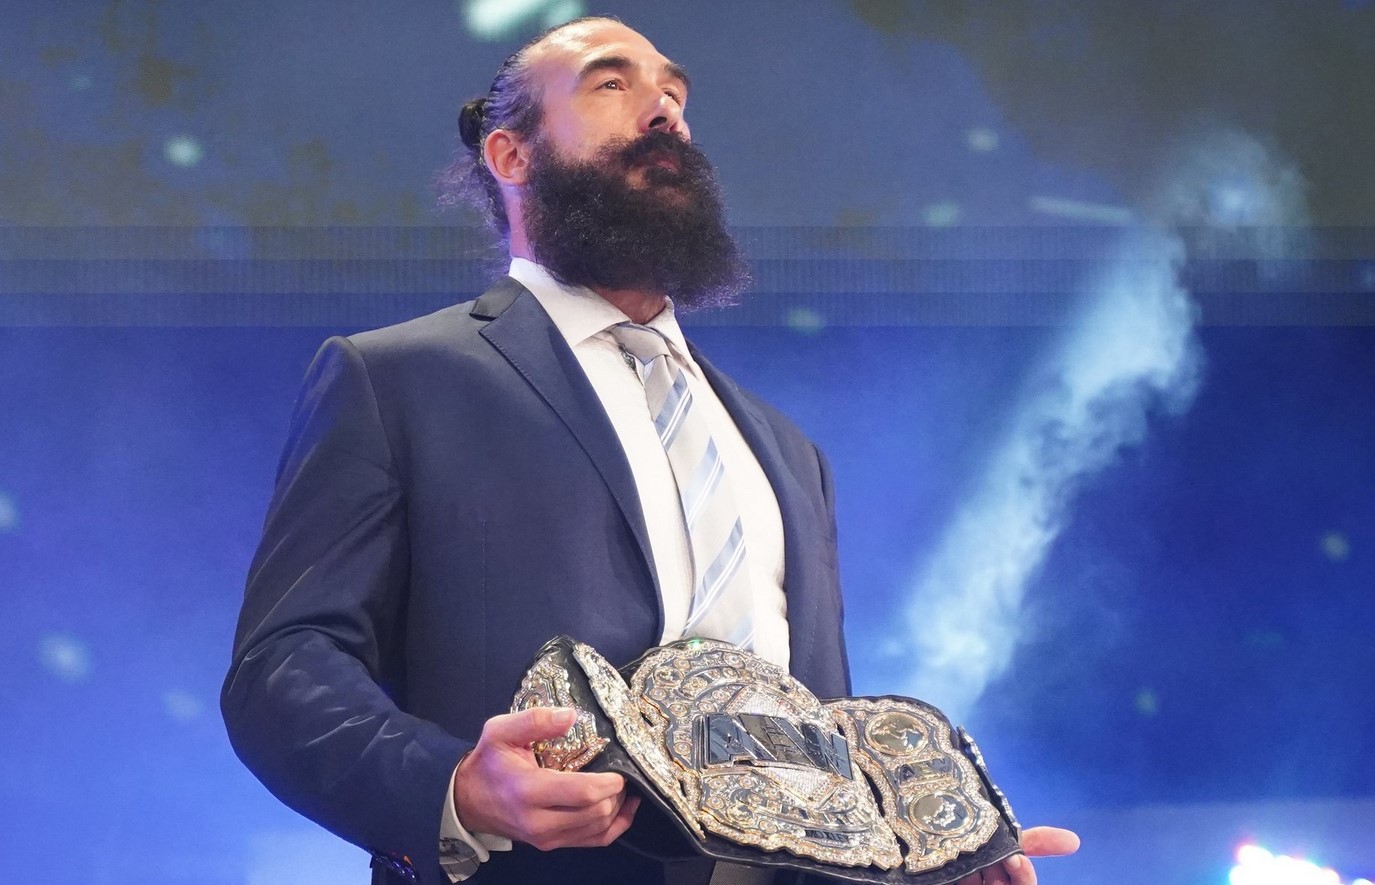 Brodie Lee was signed by AEW after being released by WWE